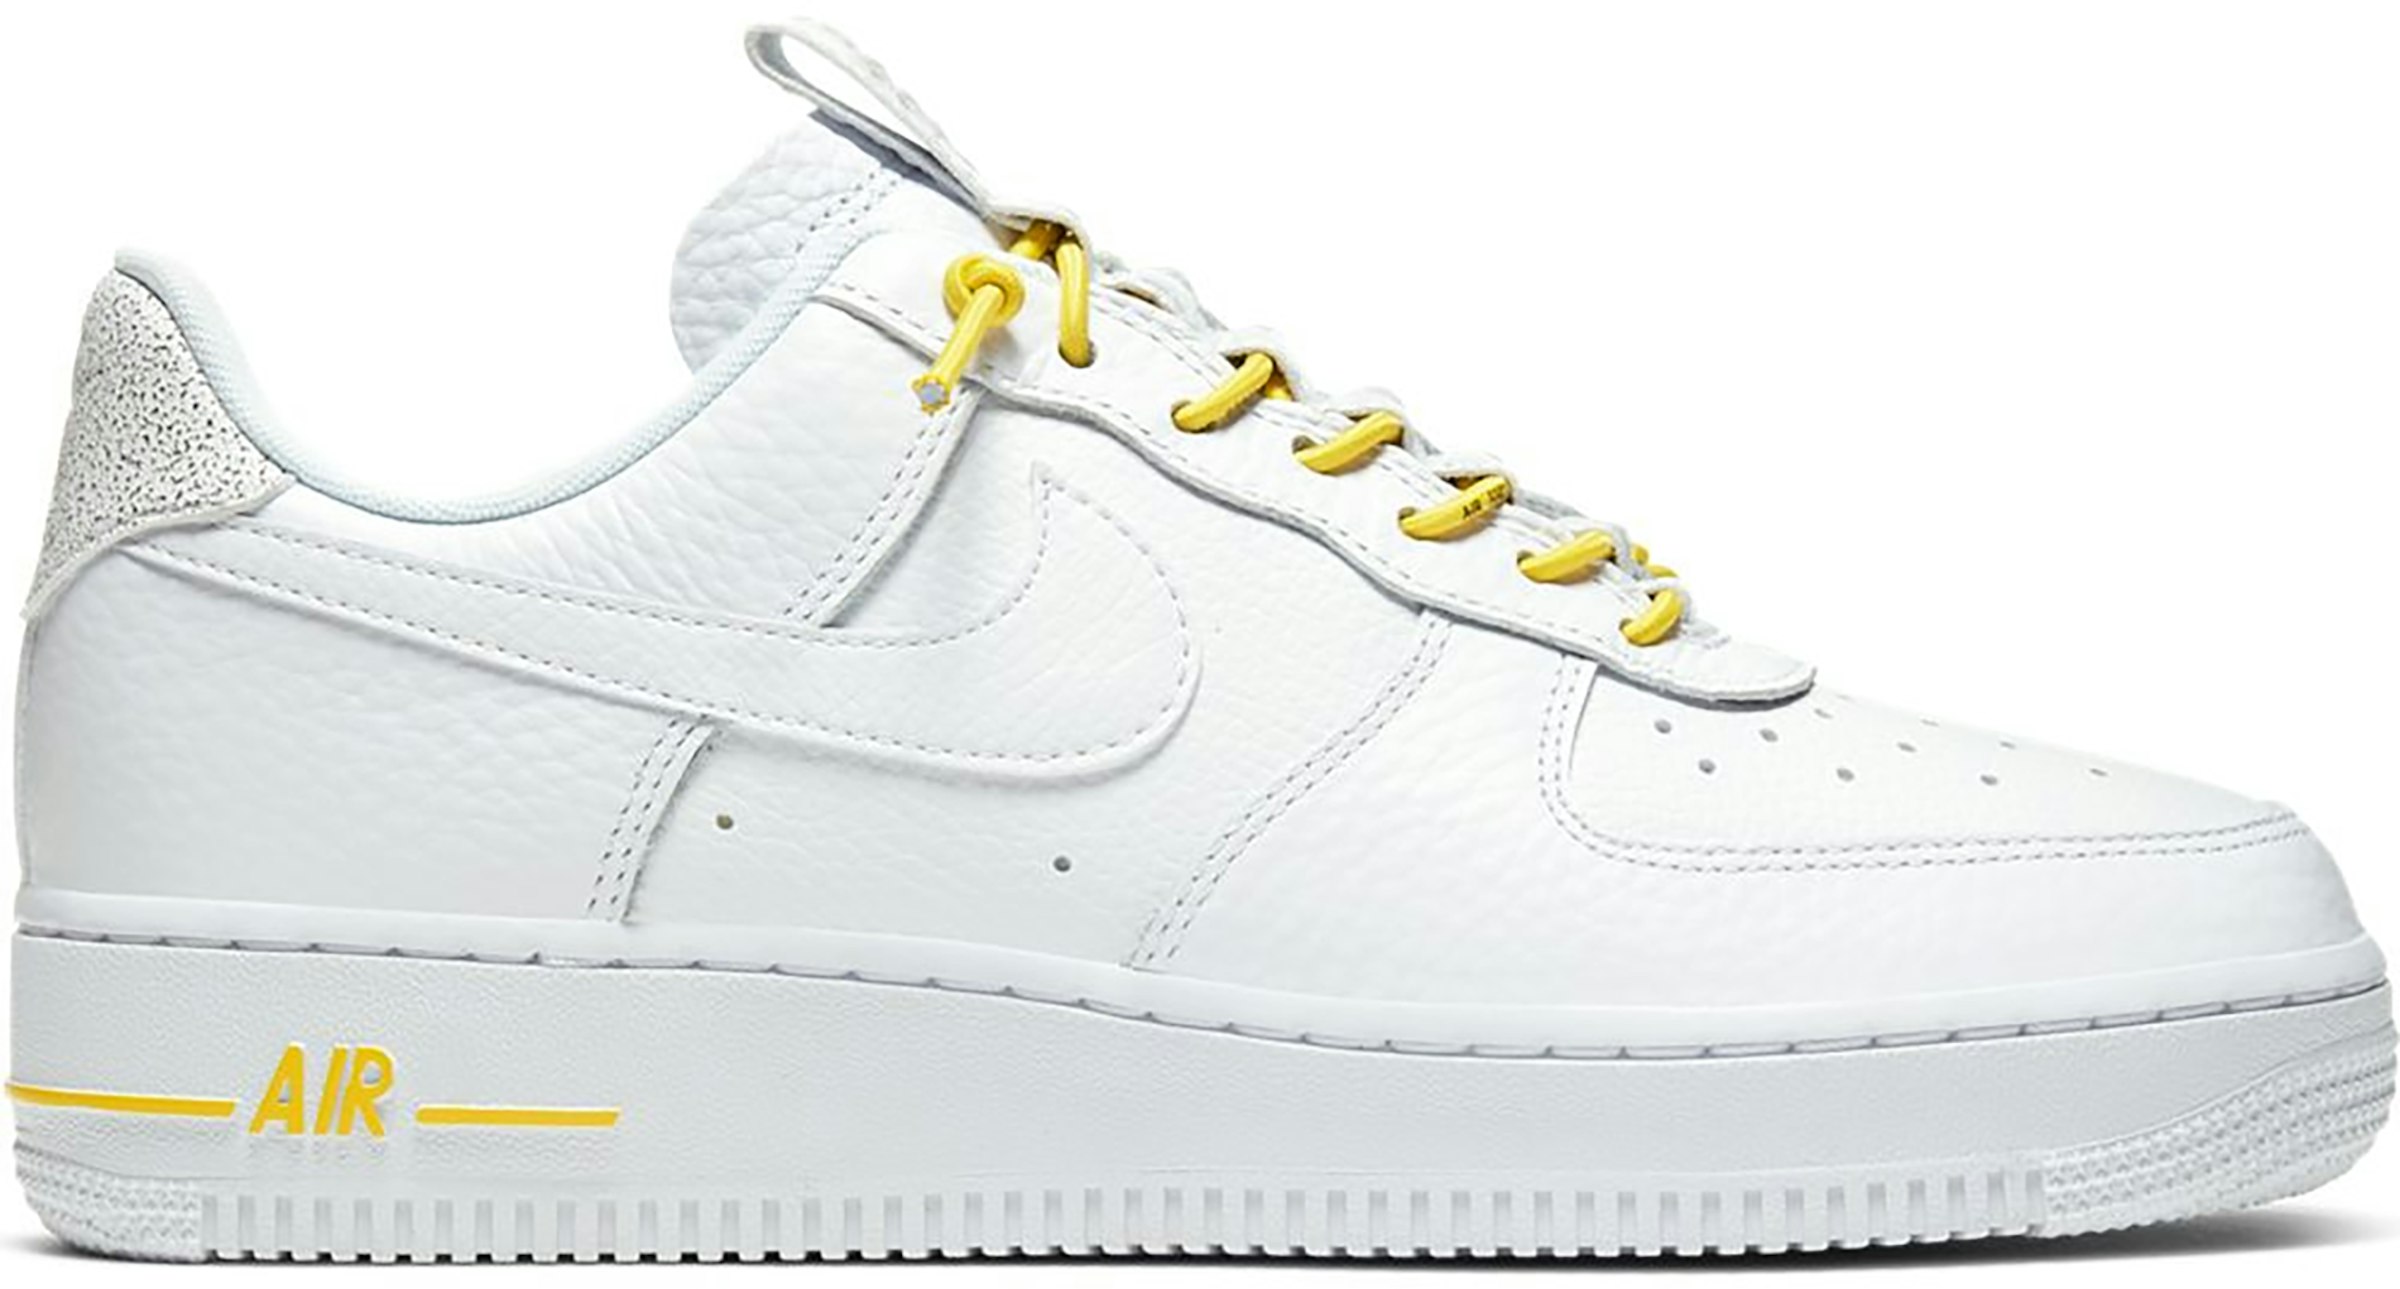 golpear abeja científico Nike Air Force 1 Low Lux White Chrome Yellow (Women's) - 898889-104 - US